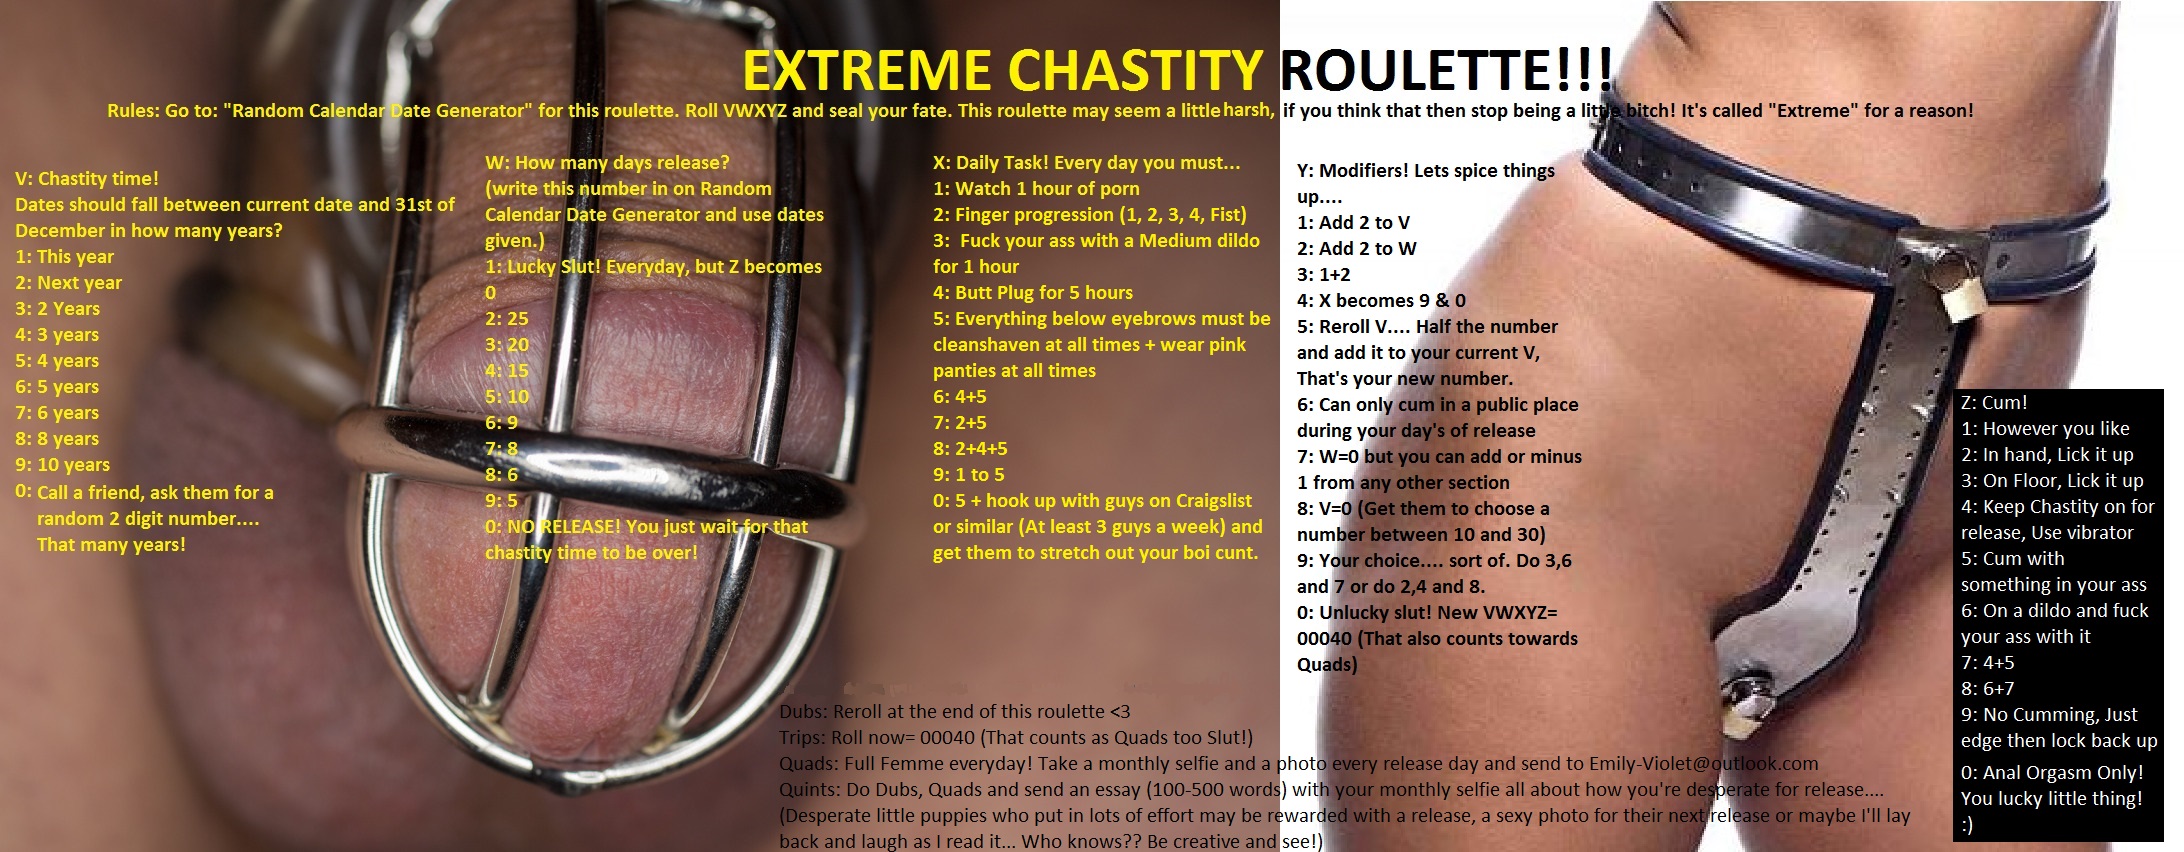 Extreme Chastity Fap Roulette. 